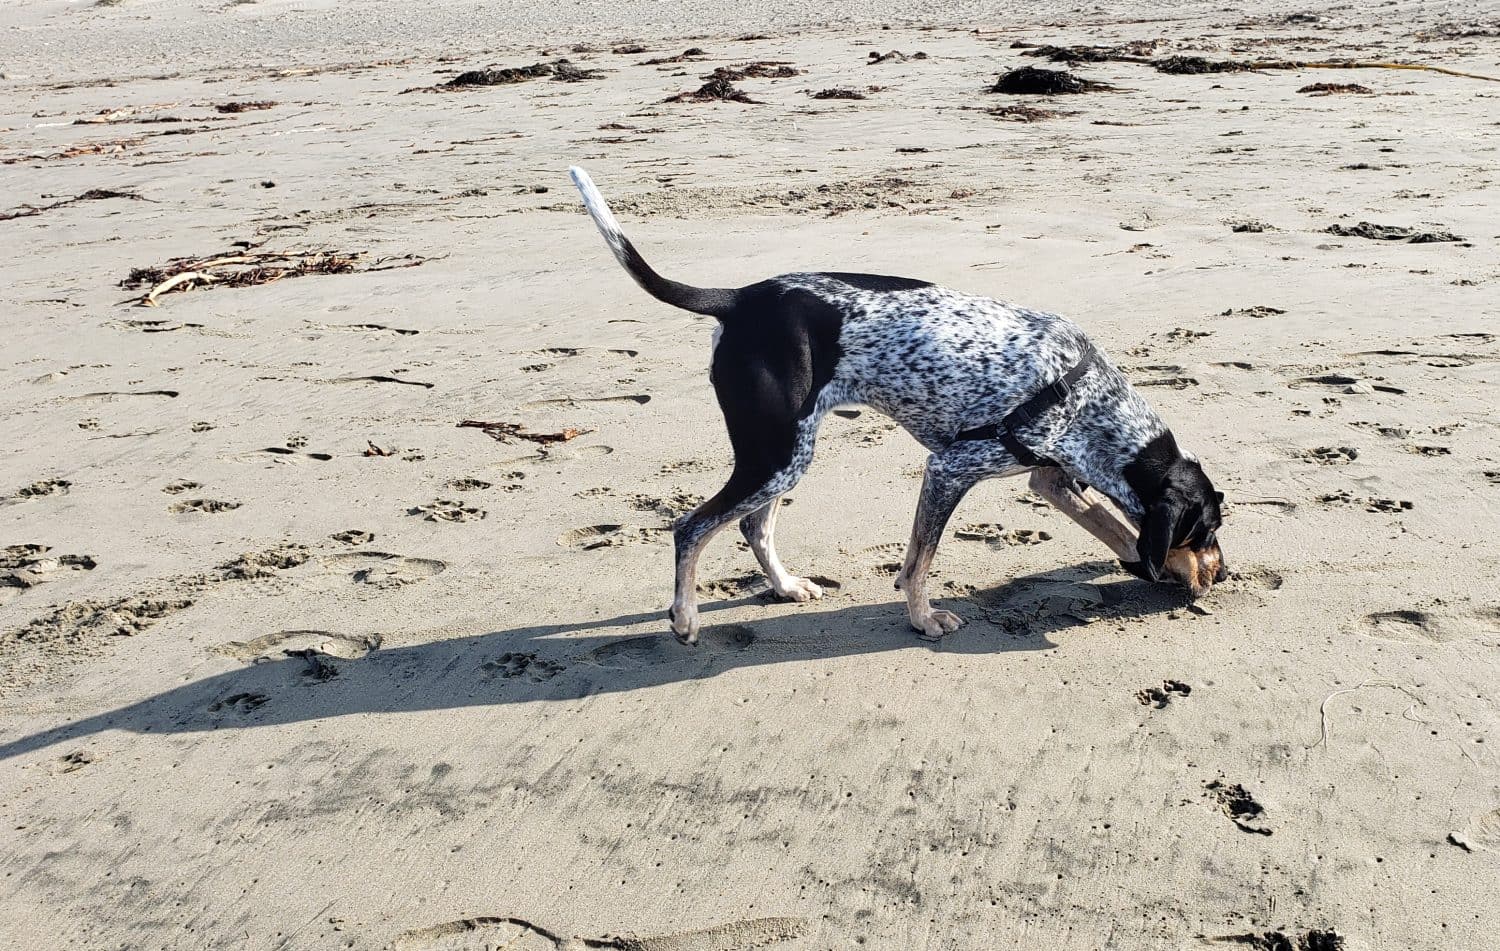 Bluetick Coonhound at dog beach in Morro Bay, California, on a beautiful sunny day.